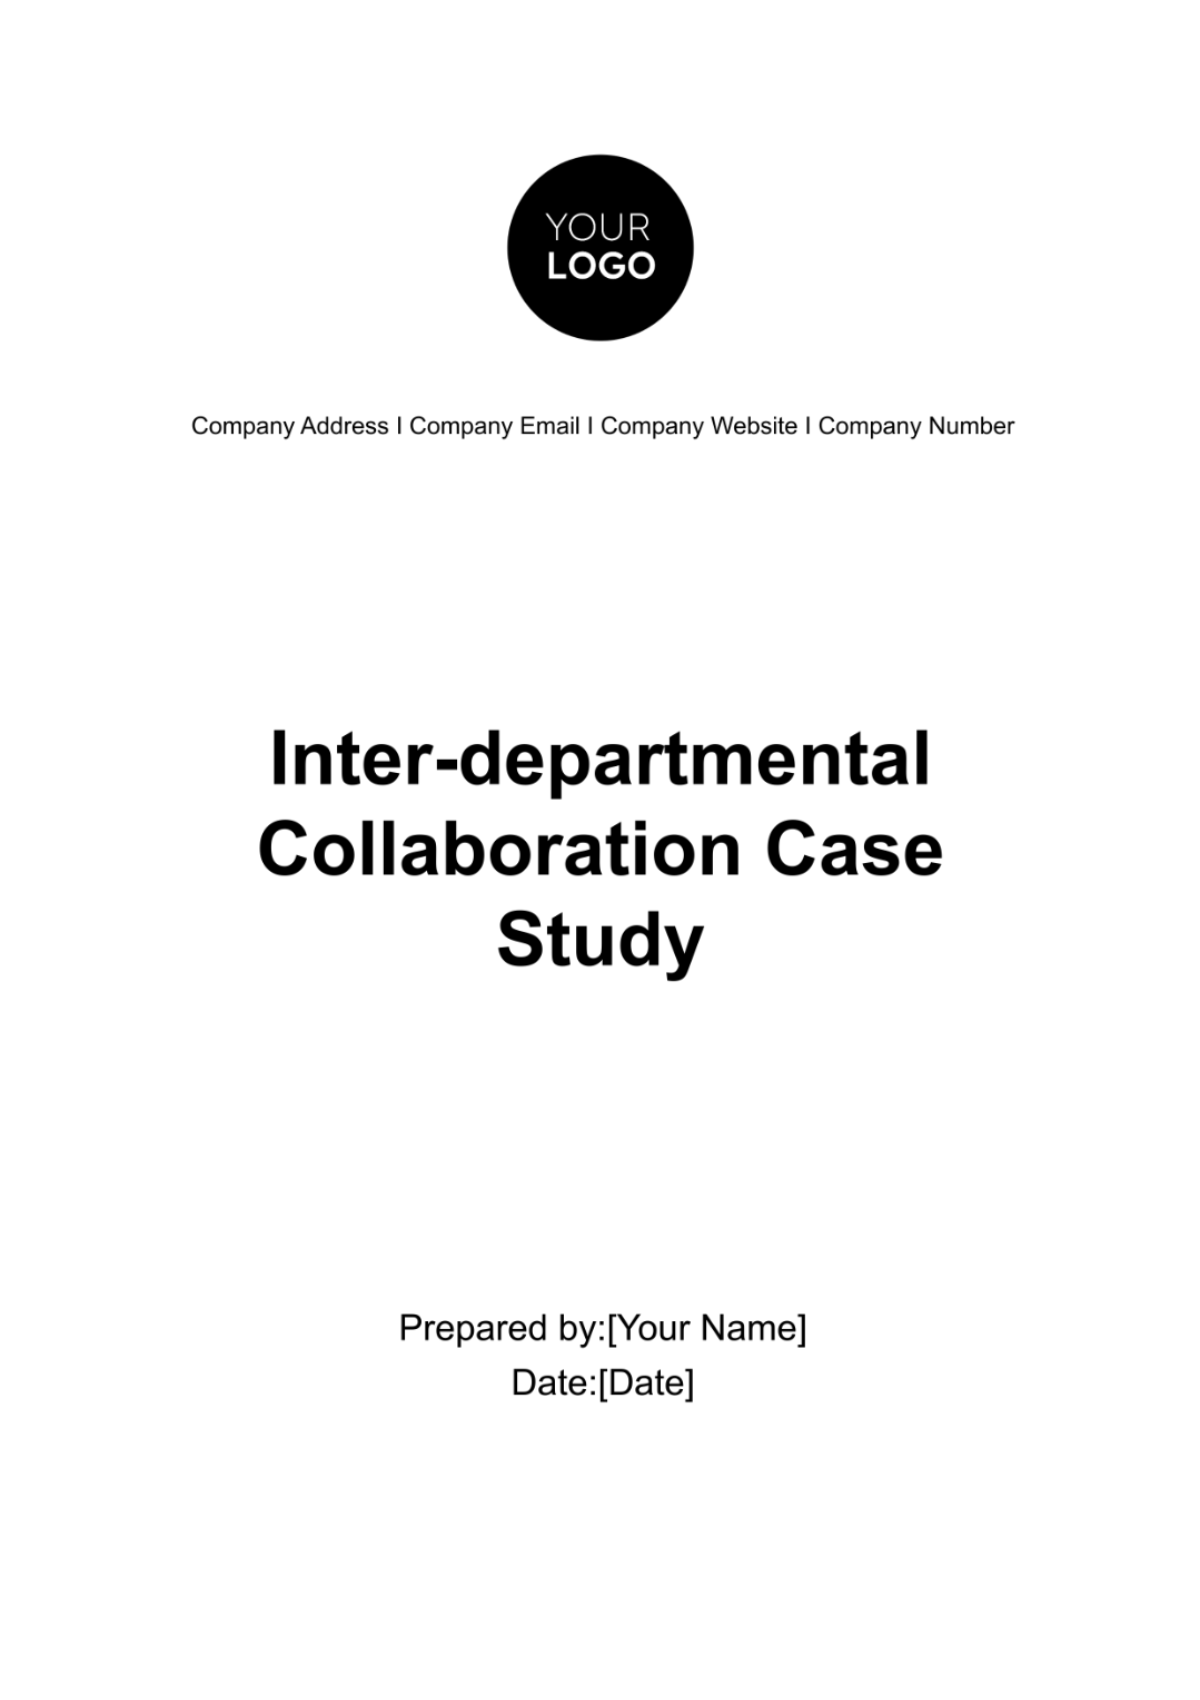 Free Inter-departmental Collaboration Case Study HR Template